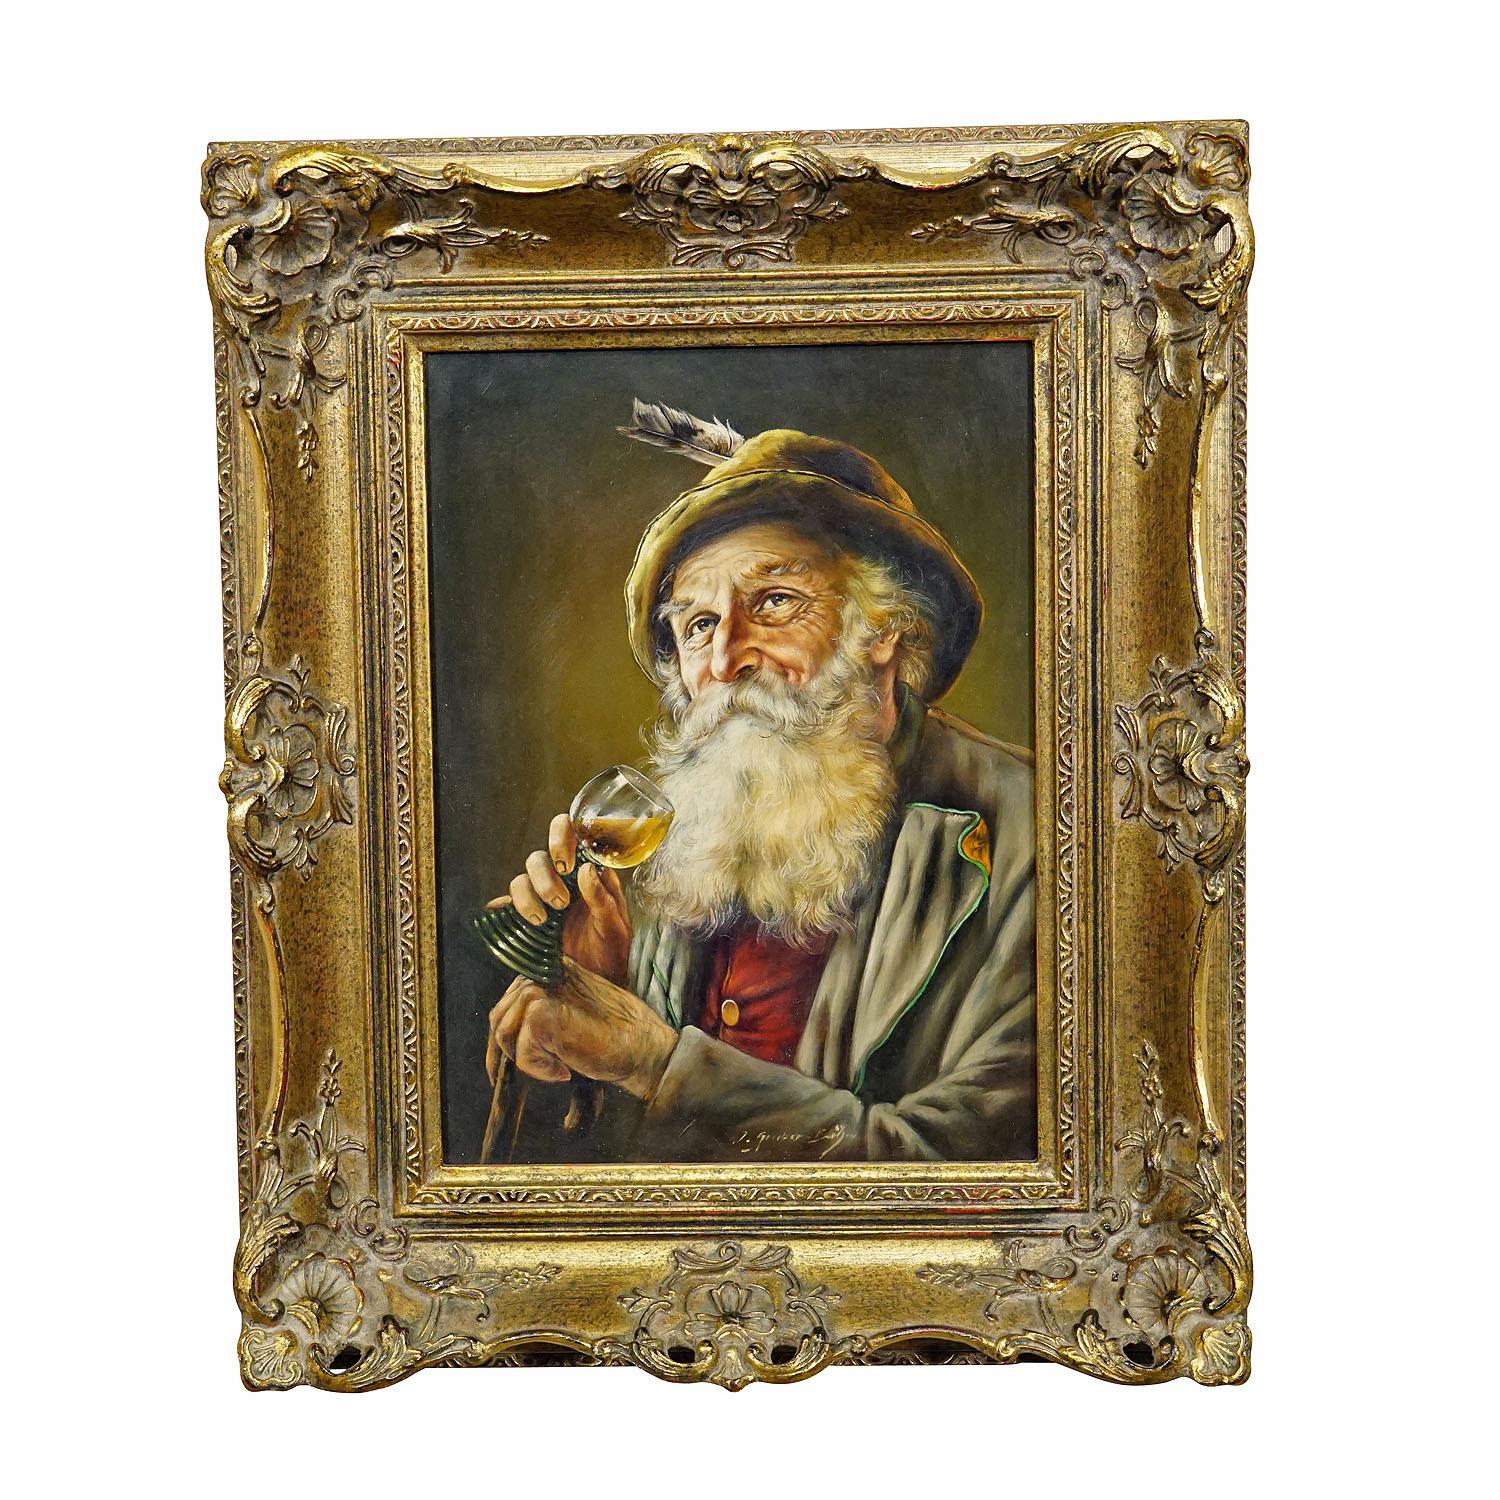 J. Gruber - Portrait of a Bavarian Folksy Man with Wine Glass, Oil on Wood

An colorful oil painting depicting a wine drinking folksy Bavarian man in his sunday robe. Painted on wood with pastel colors around 1950s. Framed with antique wooden gilded